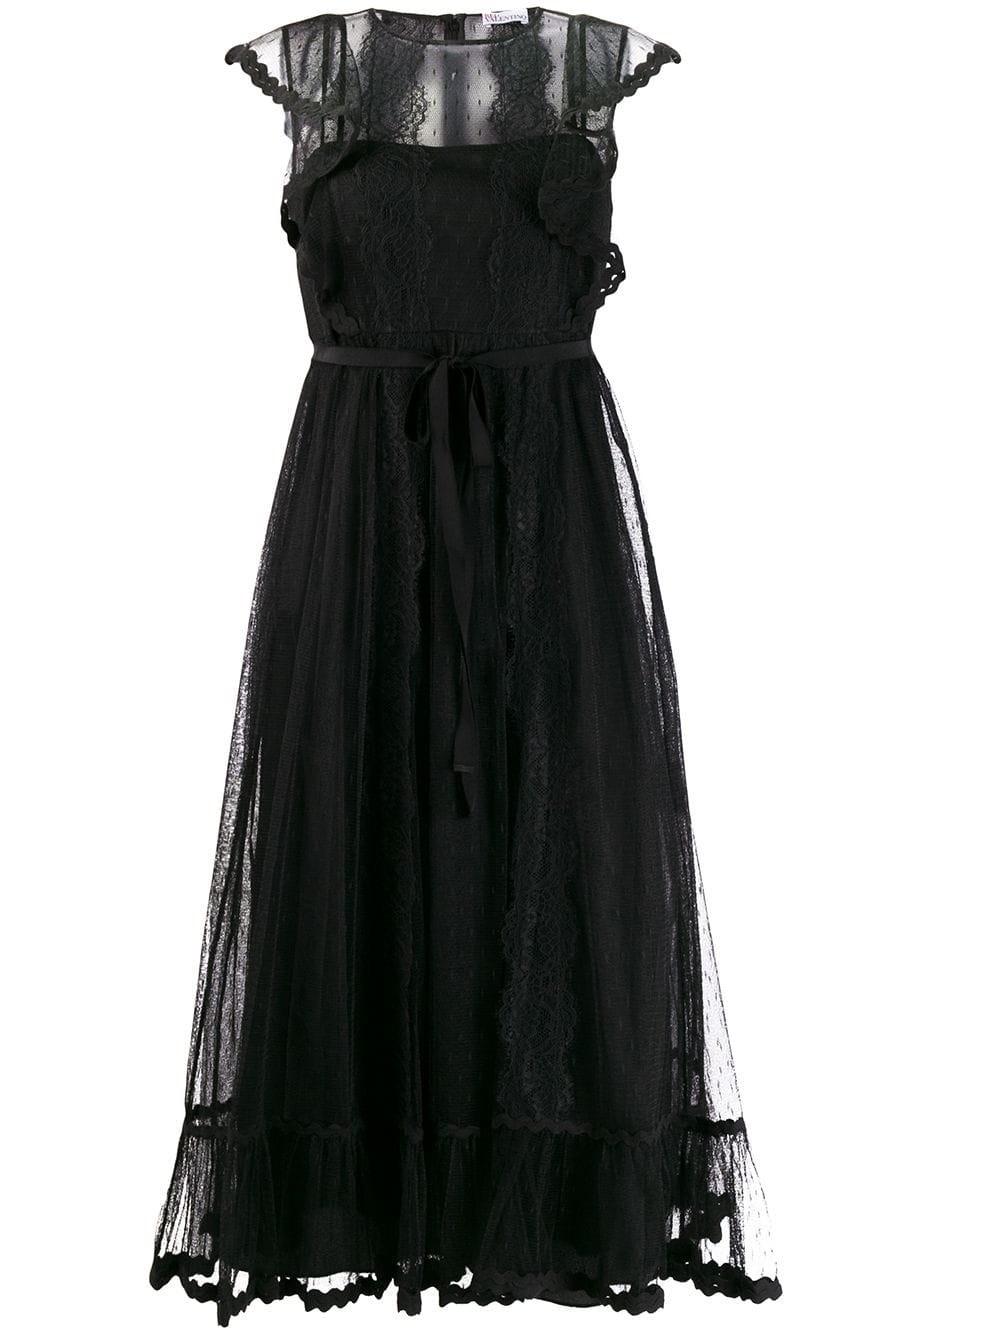 RED Valentino Embroidered Tulle Dress in Black - Lyst